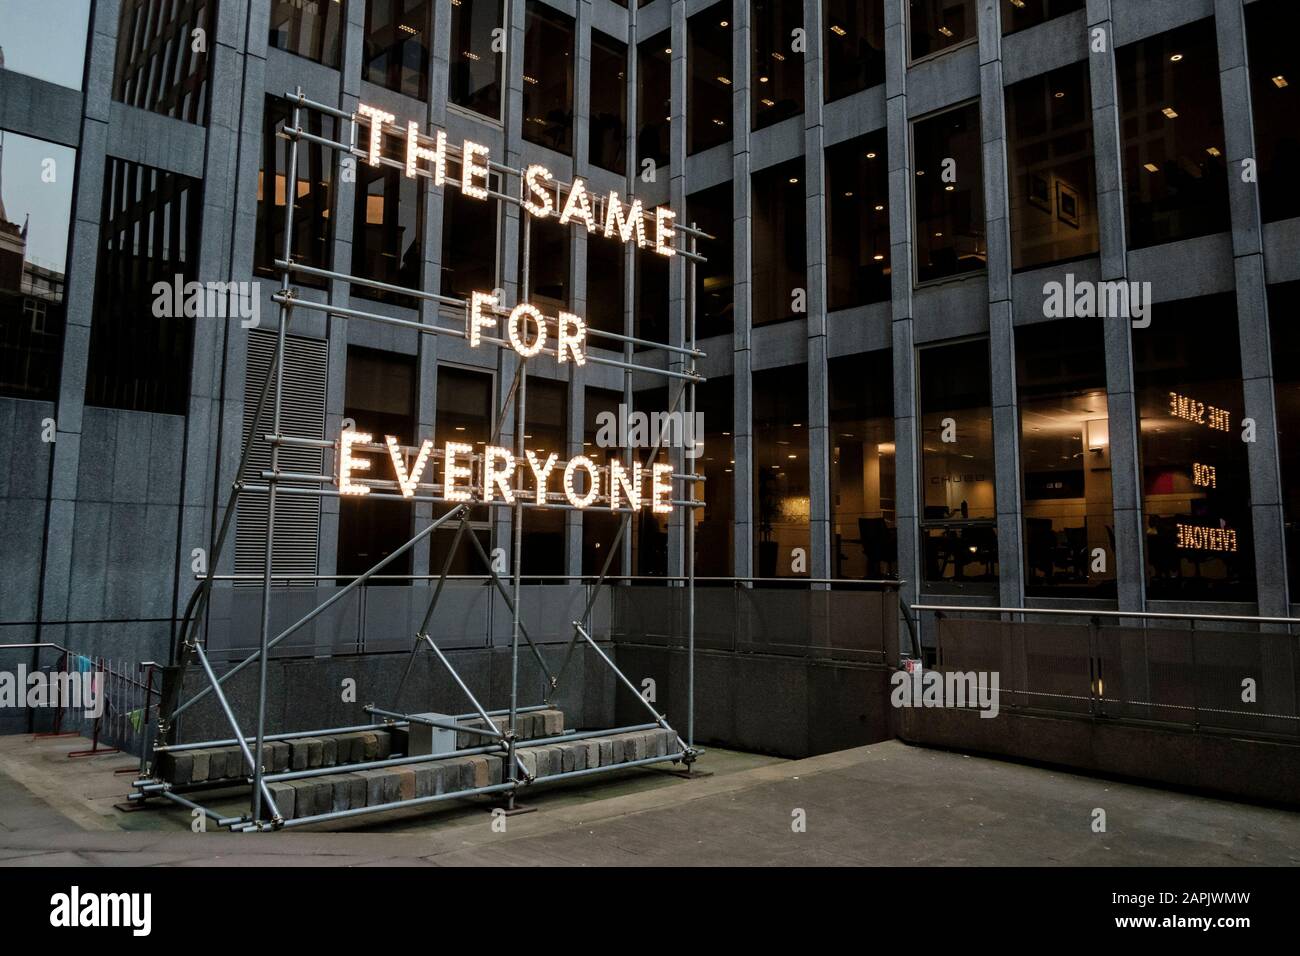 Sculpture in the City: The Same for Everyone by Nathan Coley. City of London, UK. Stock Photo